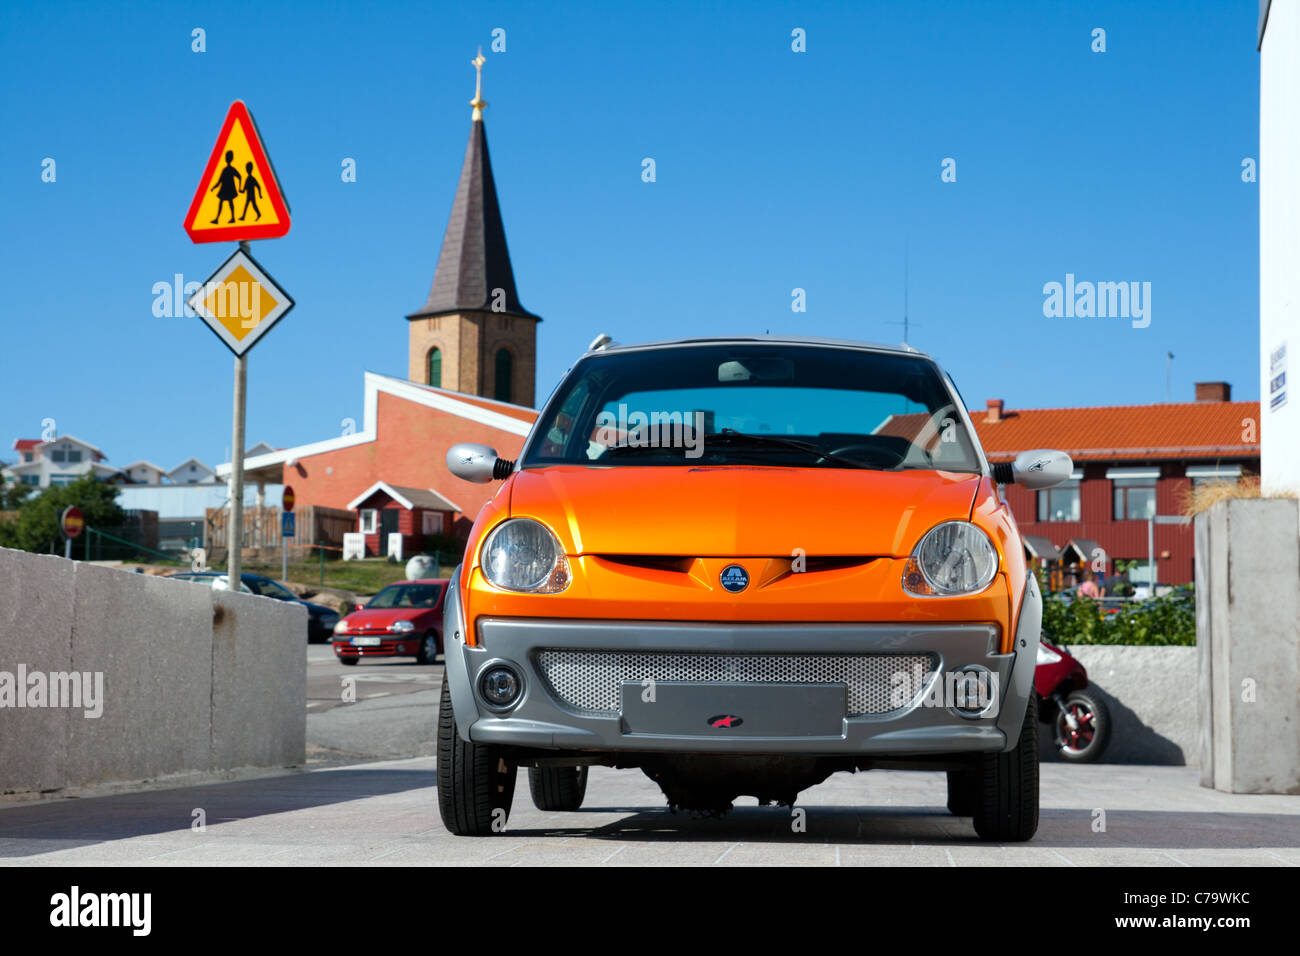 Aixam A751 Scouty microcar in Sweden Stock Photo